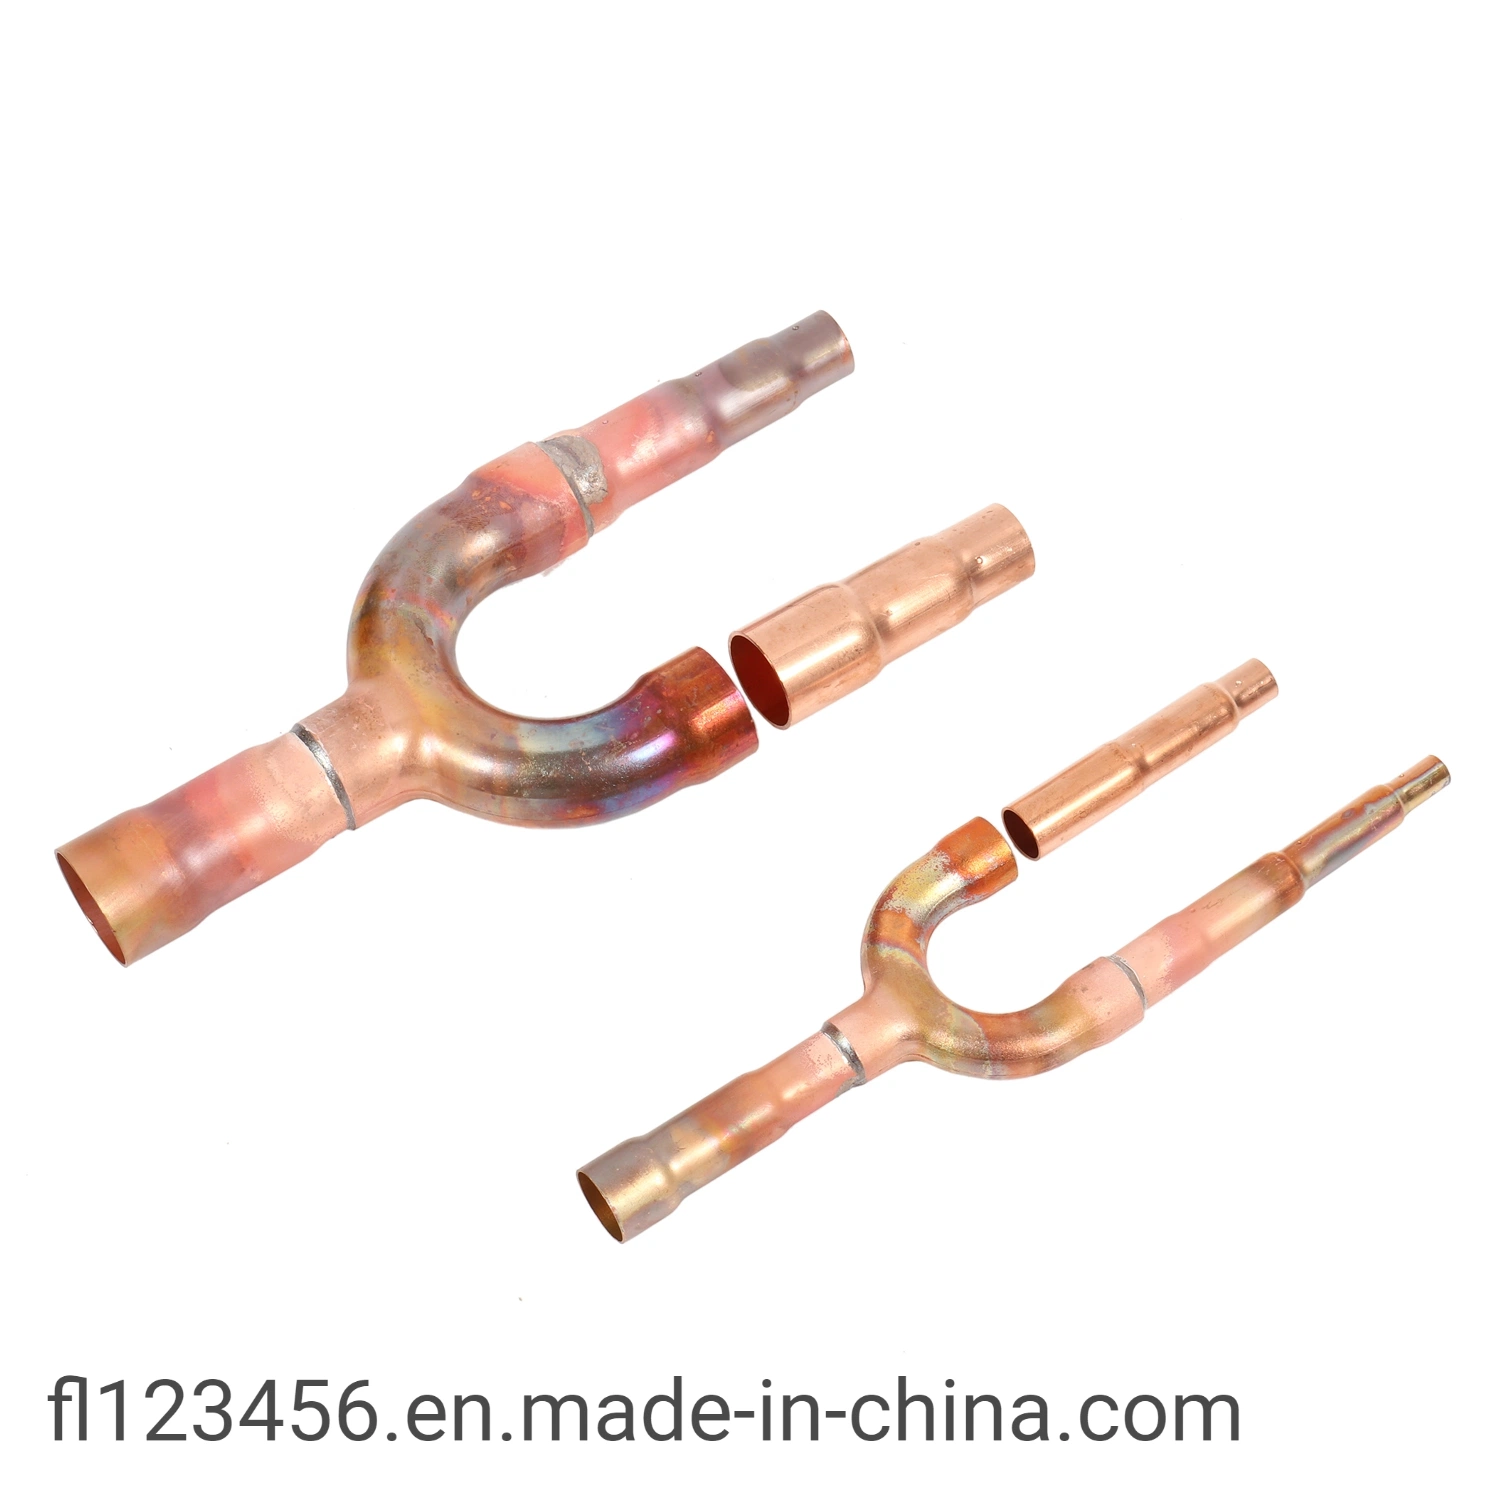 Professional Brazing Wholesale Y Branch-off Joint Tube Connector Daikin Branch Pipe